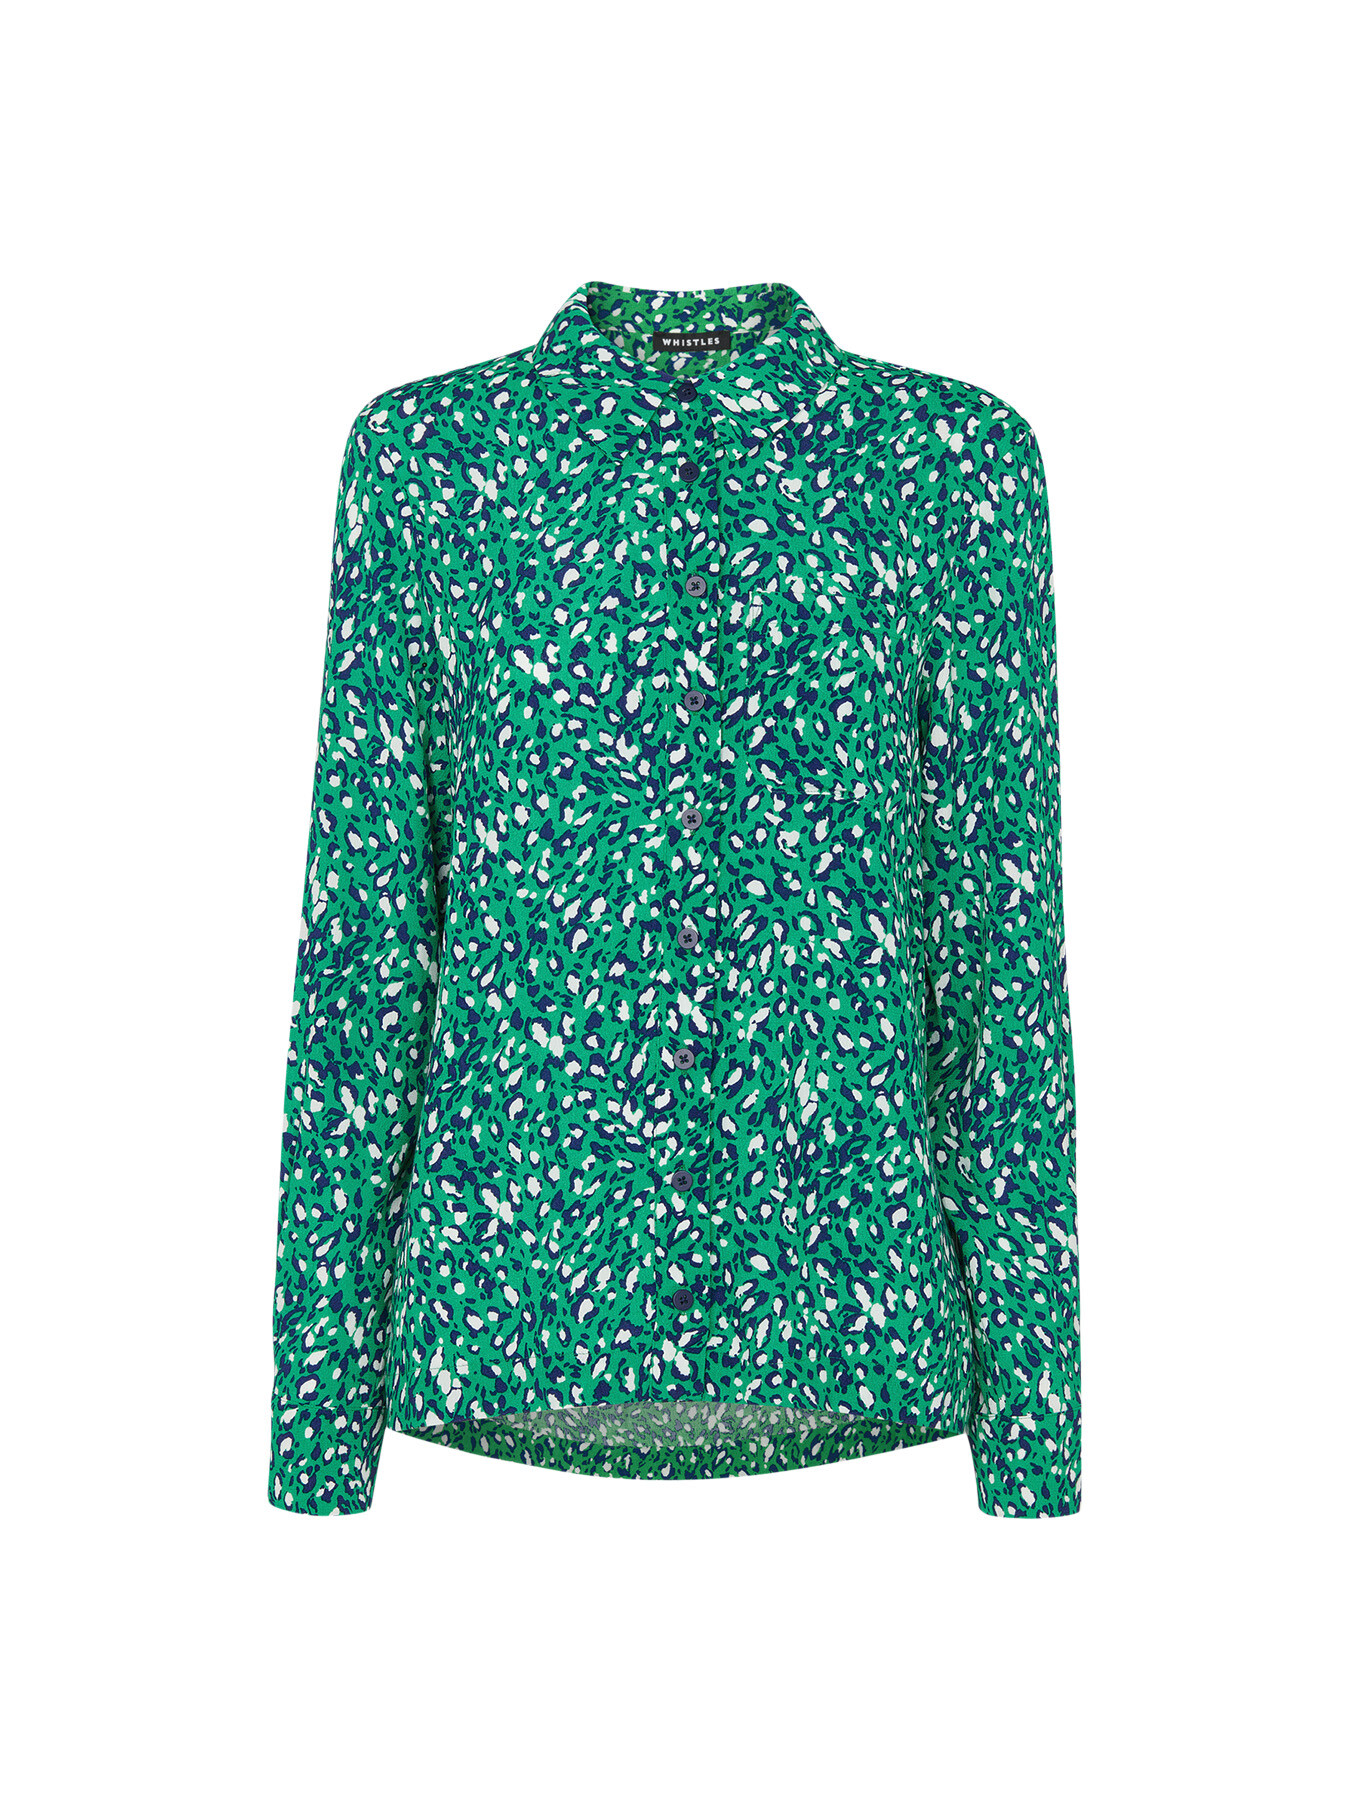 Whistles Flowing Shirt In Green/multi